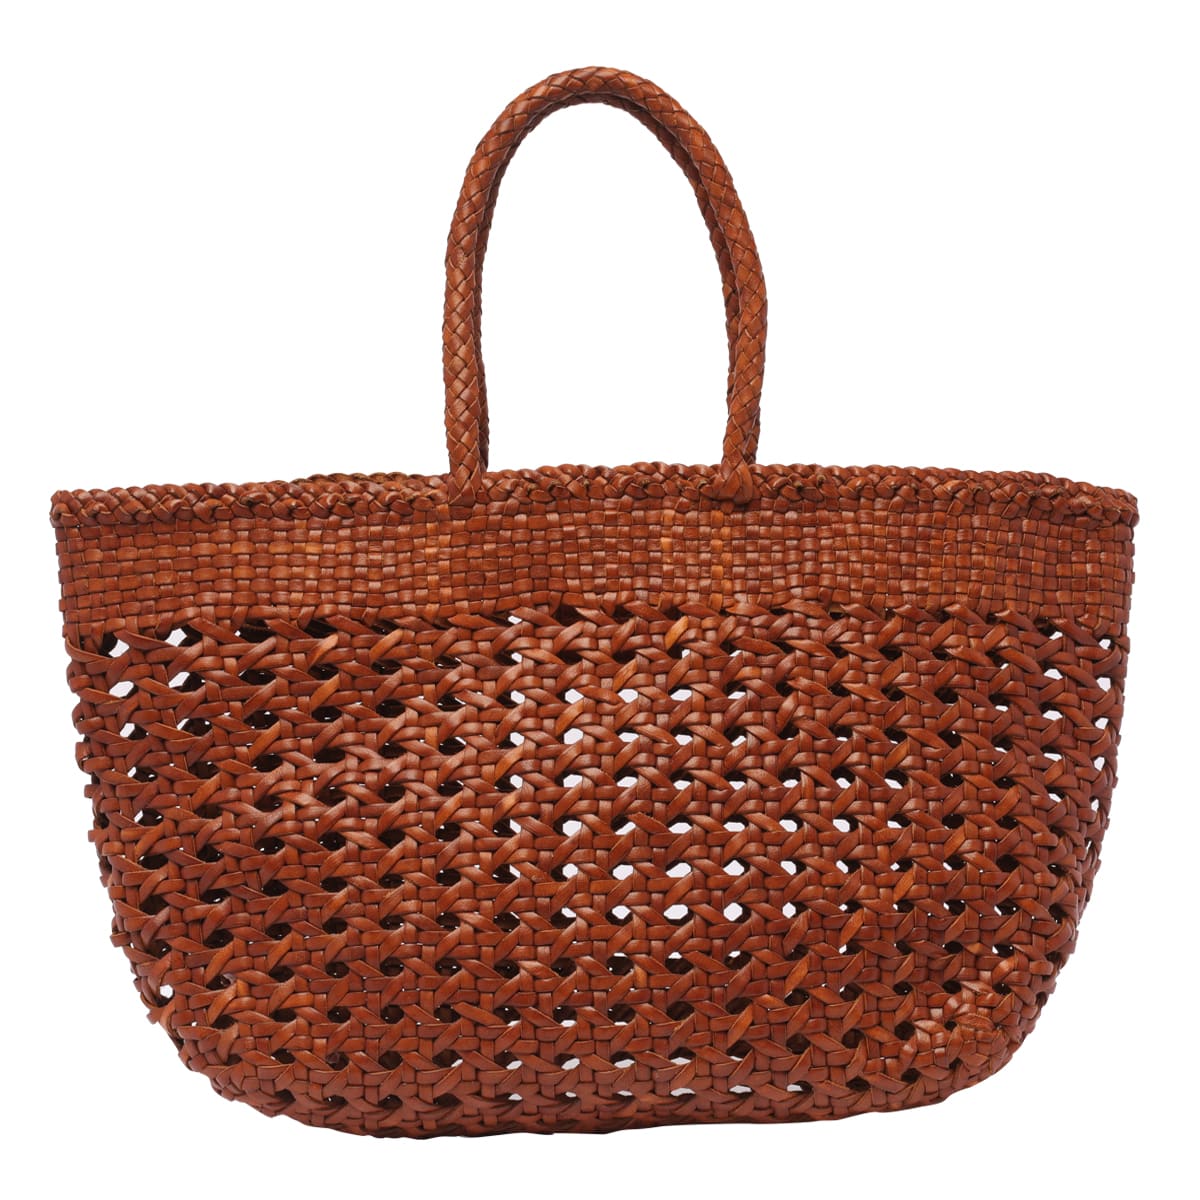 Beige Nantucket large woven-leather basket bag, Dragon Diffusion